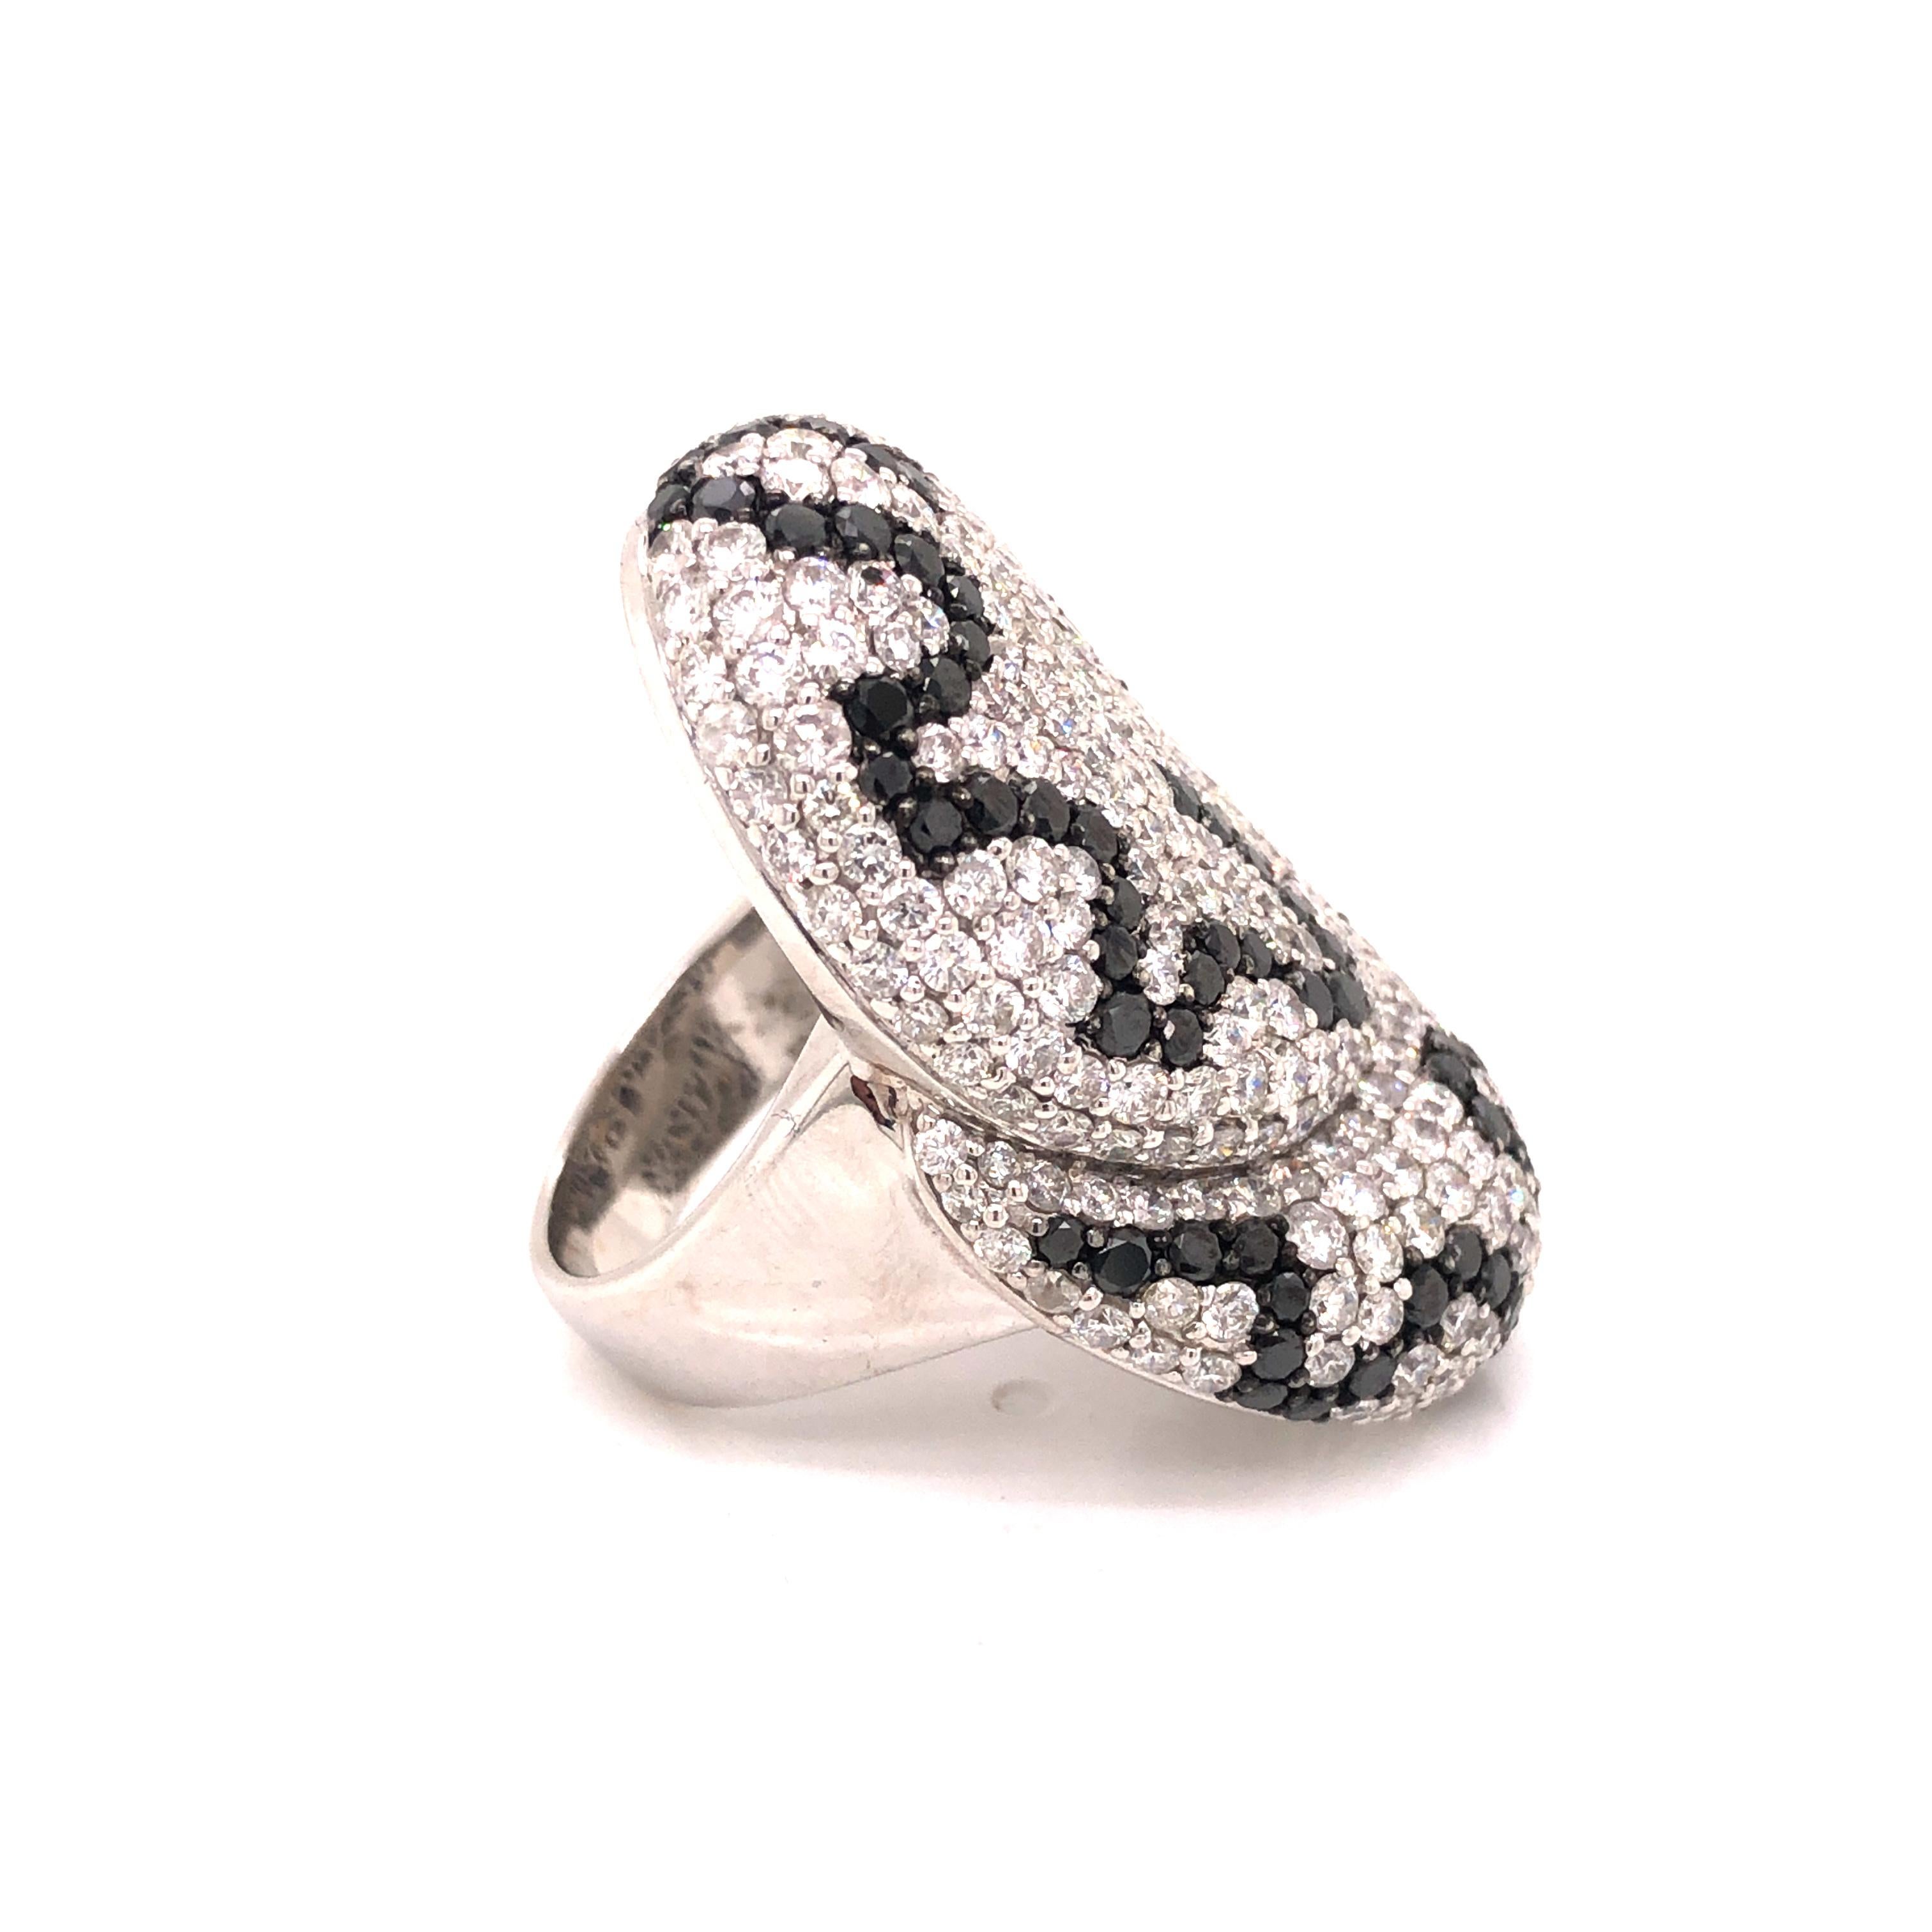 An 18K White Gold Diamond & Black Diamond Statement Ring consisting of round-cut white and black diamonds.

Stone: Diamond ~ 5.50 carats , Black Diamond ~ 2.51 carats

Metal: 18K White Gold

Size: 7

Total Weight: 20.7 grams